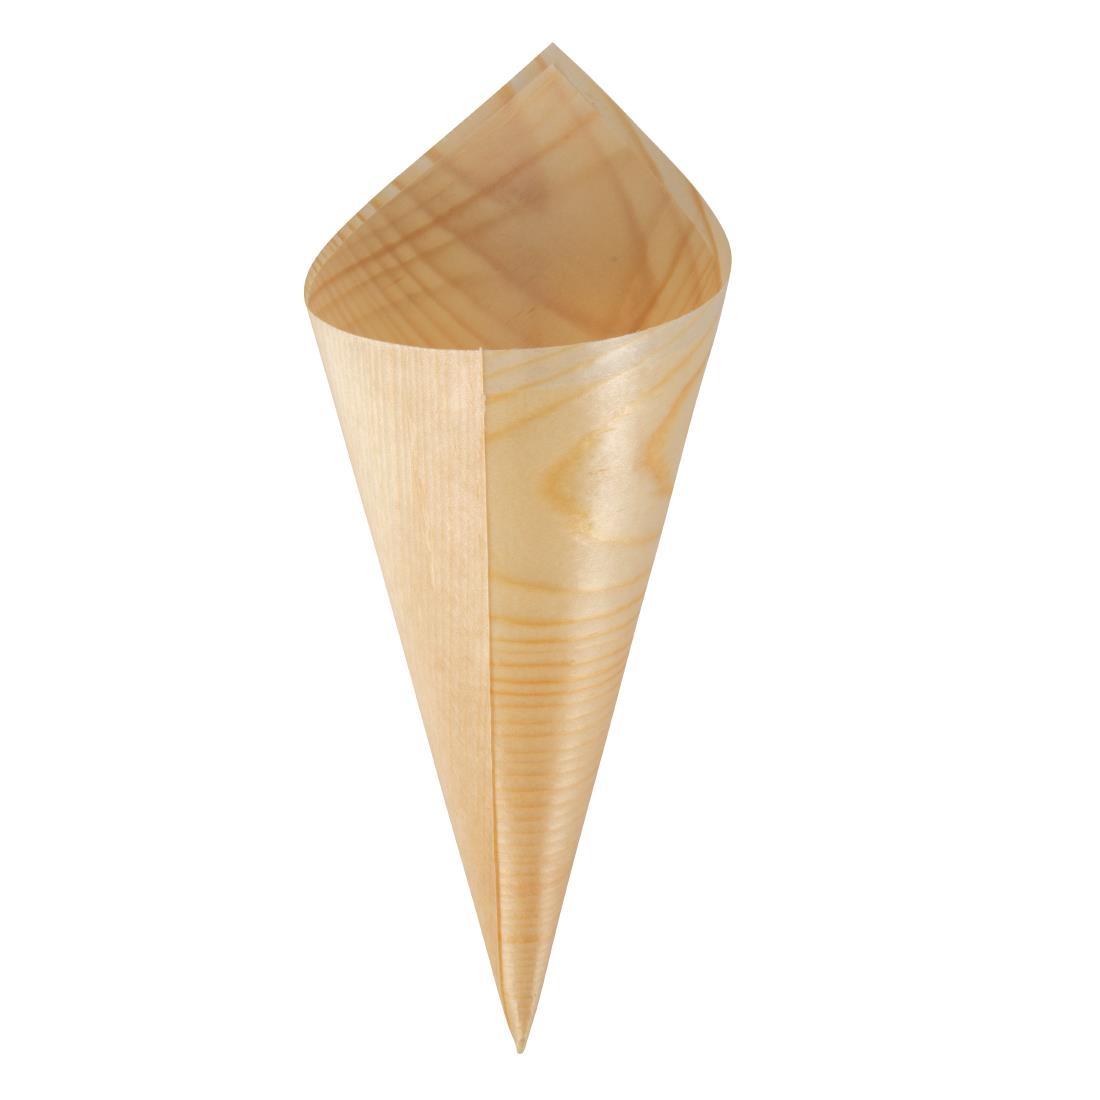 Fiesta Compostable Wooden Canape Cones 75mm (Pack of 100) - DK389  - 1